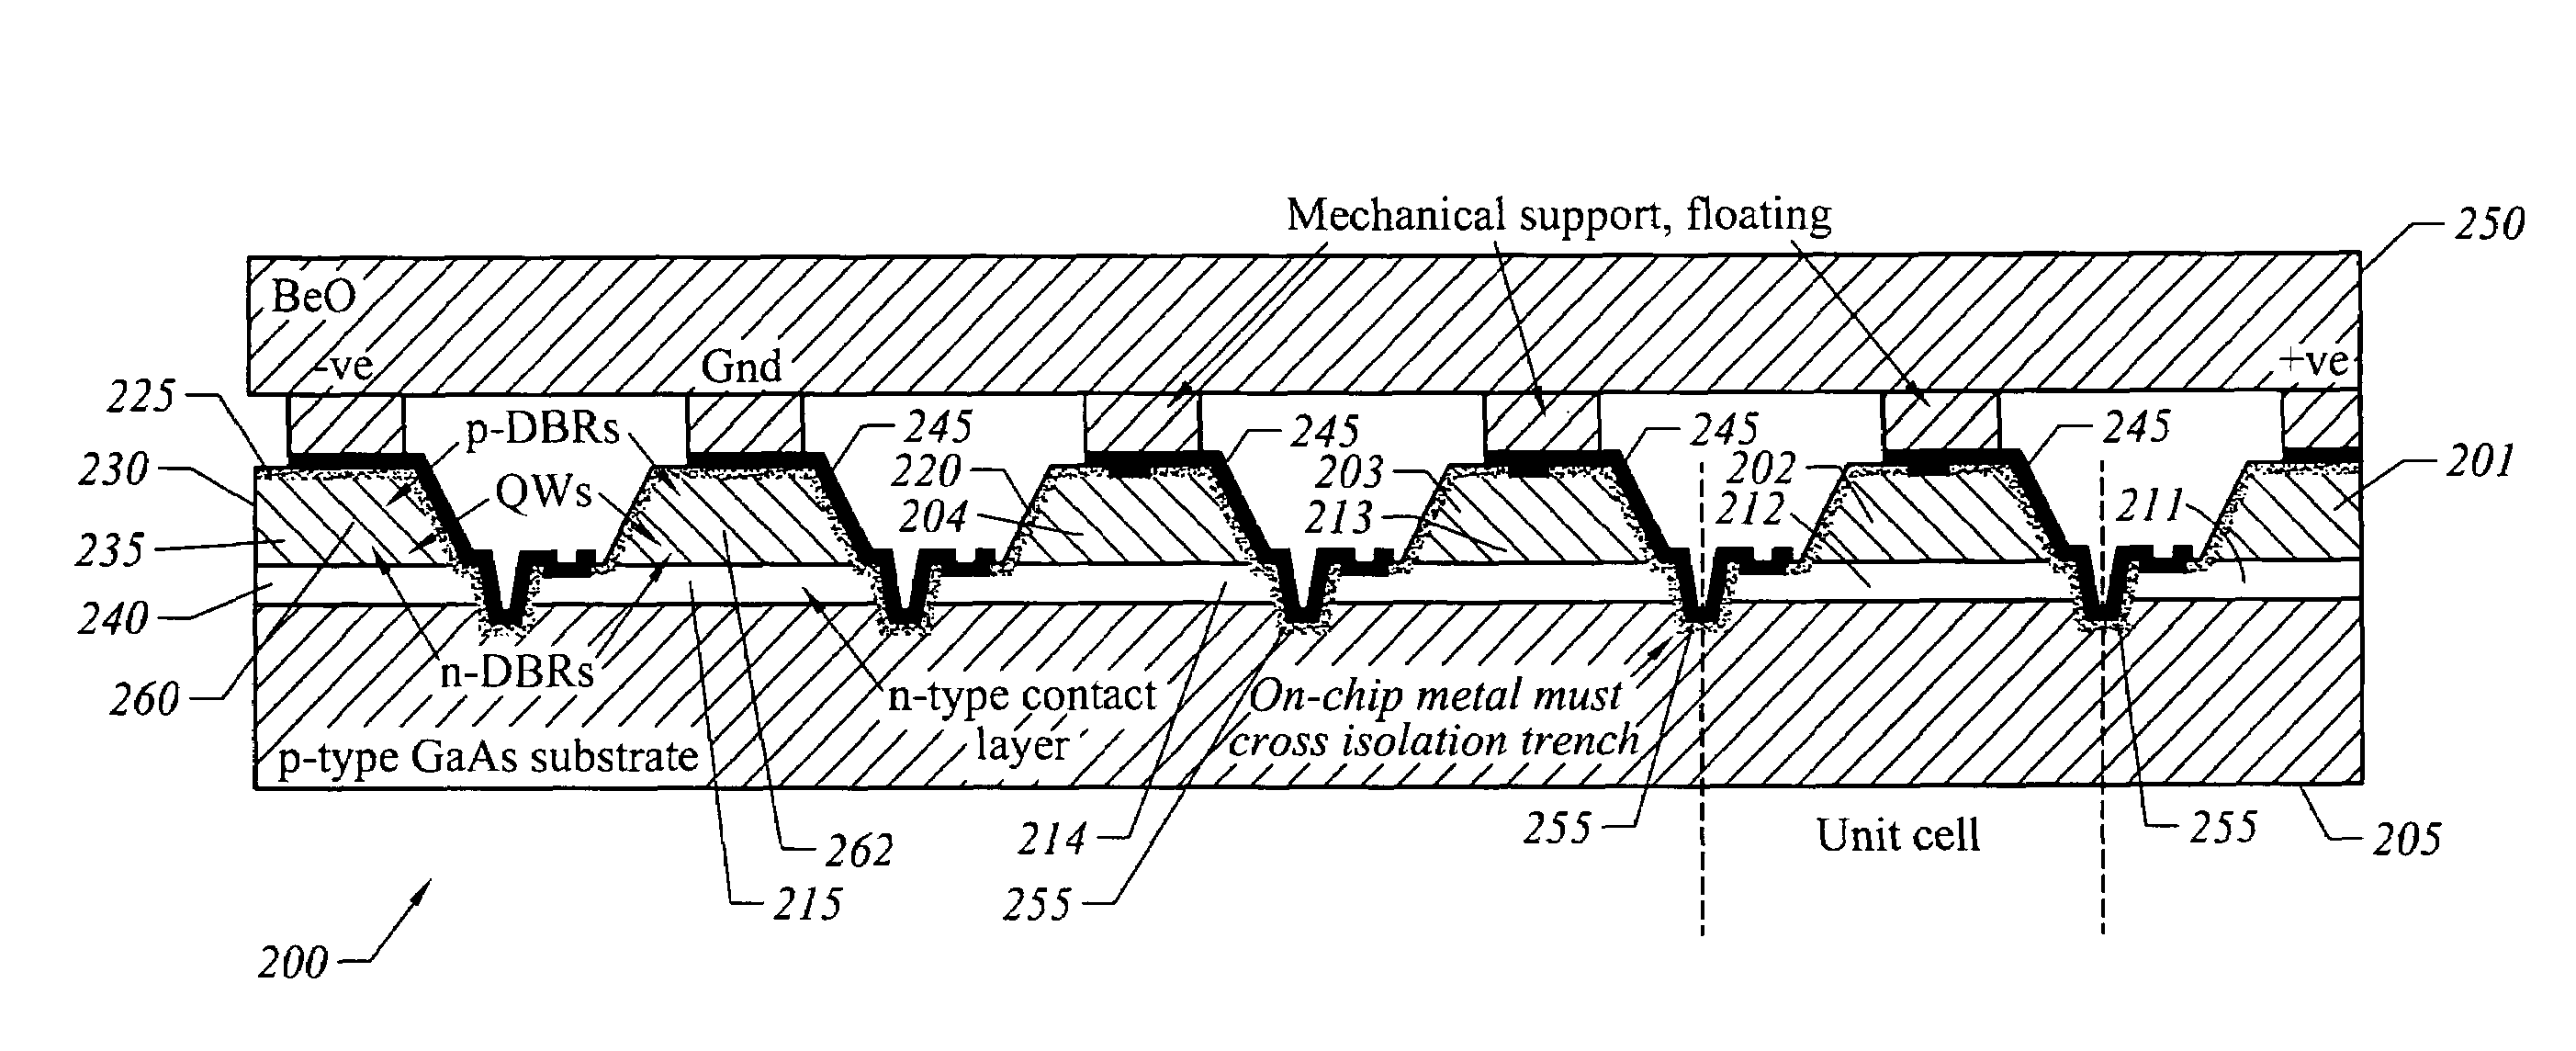 Apparatus, system, and method for junction isolation of arrays of surface emitting lasers